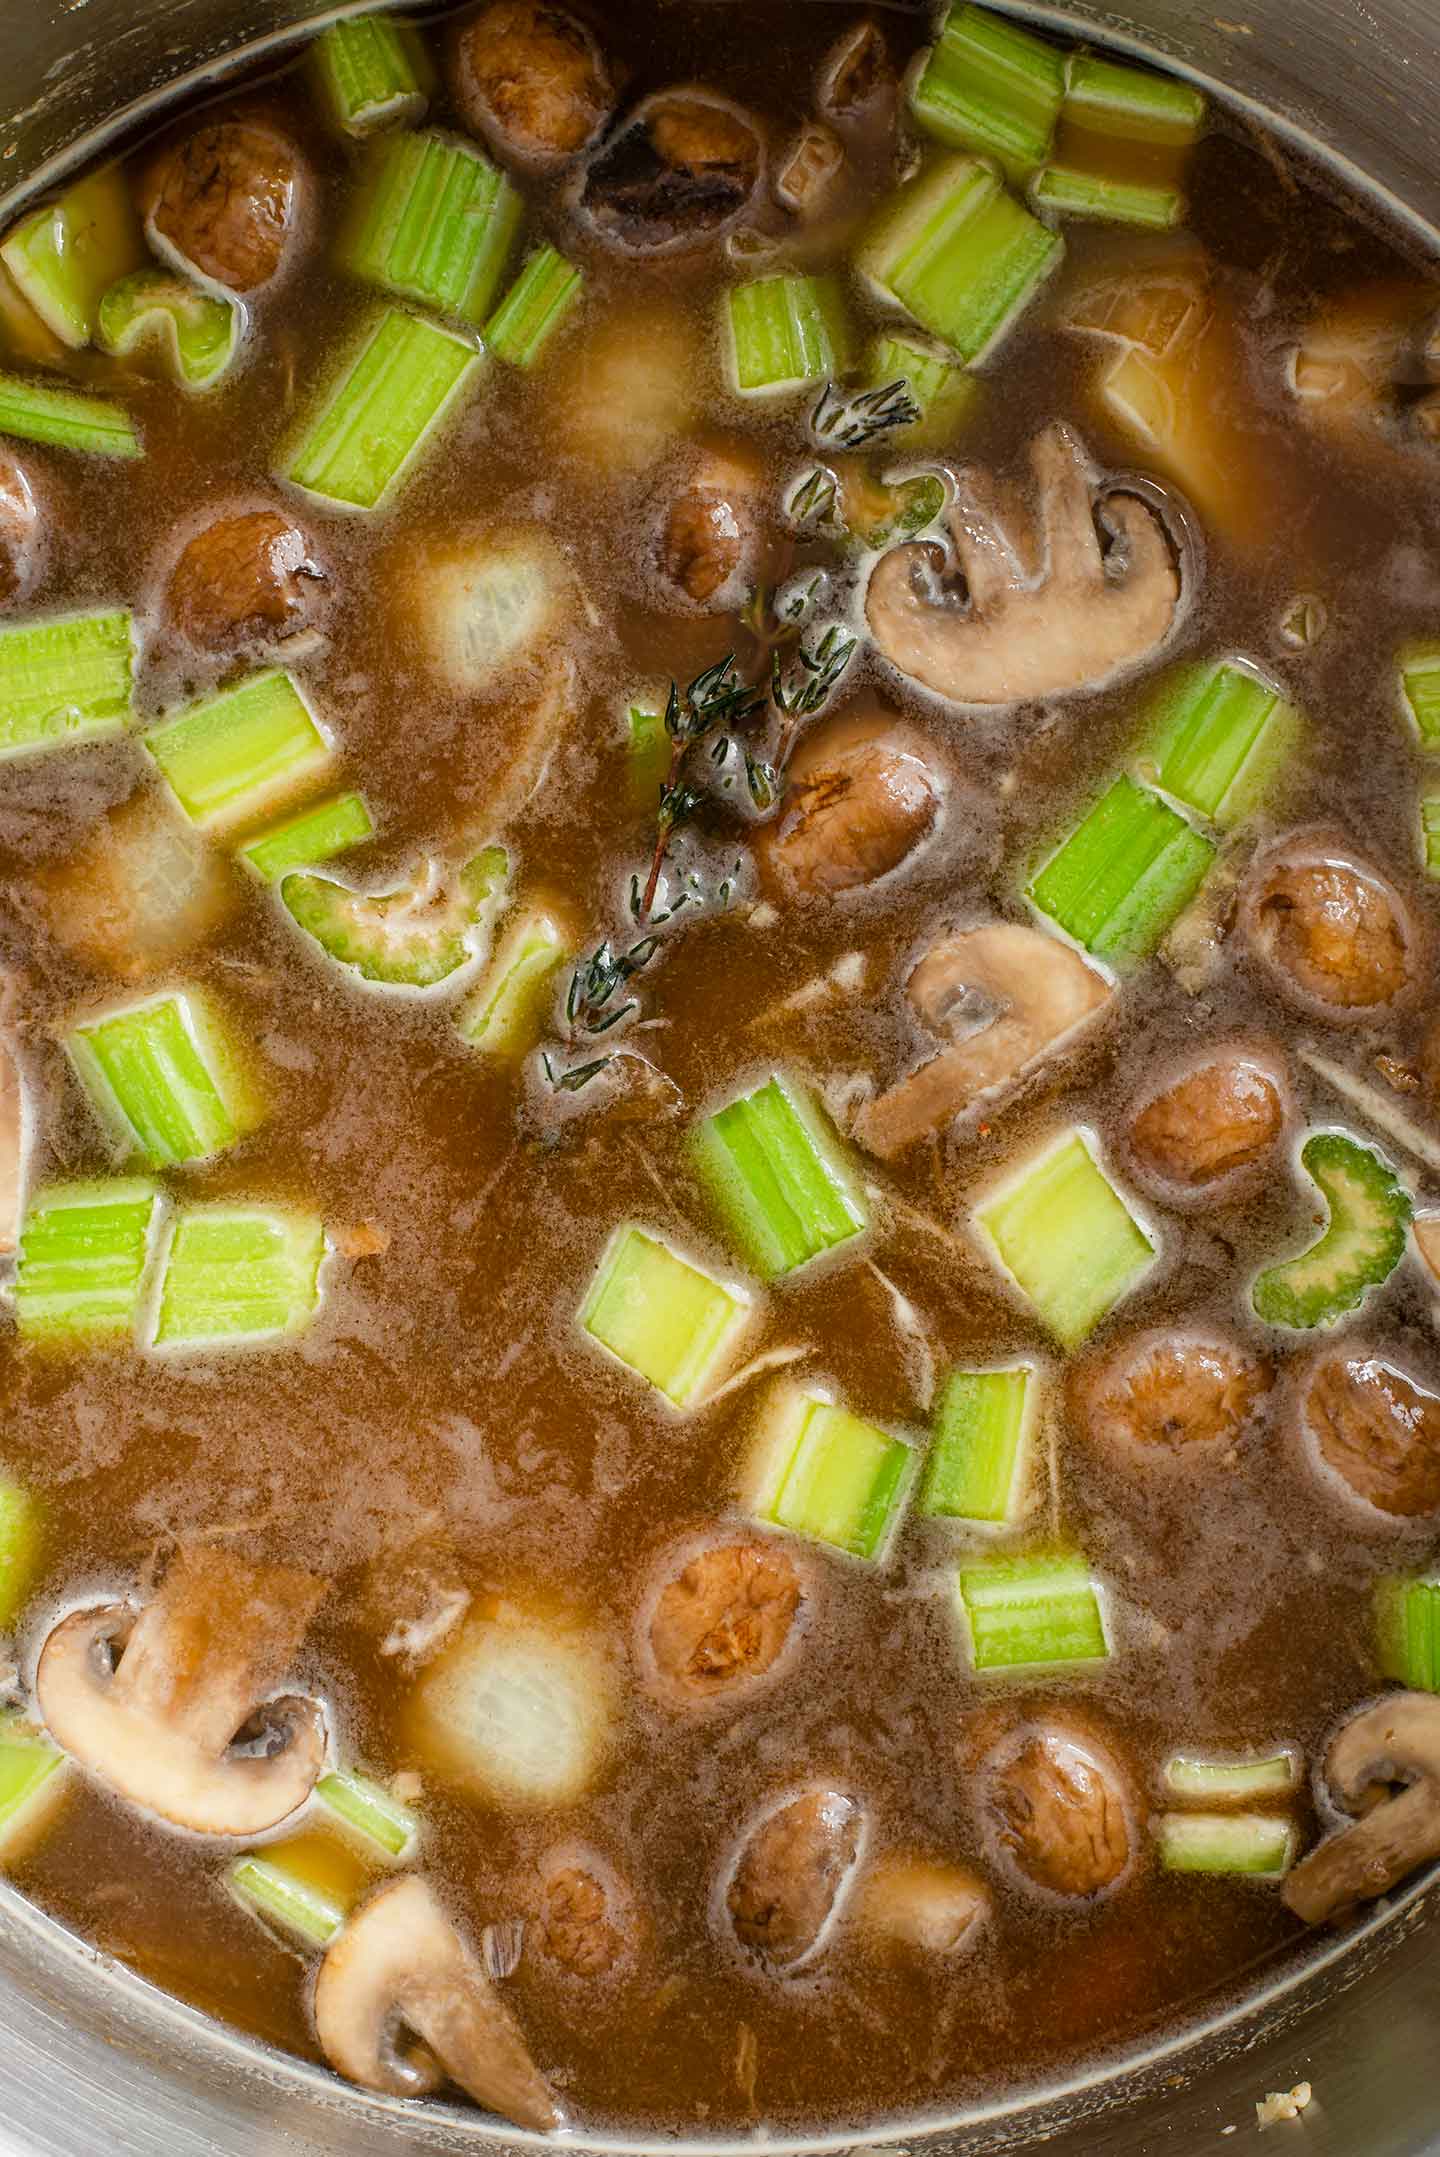 Top down view of chopped vegetables covered with a dark broth. A sprig of thyme floats on top.